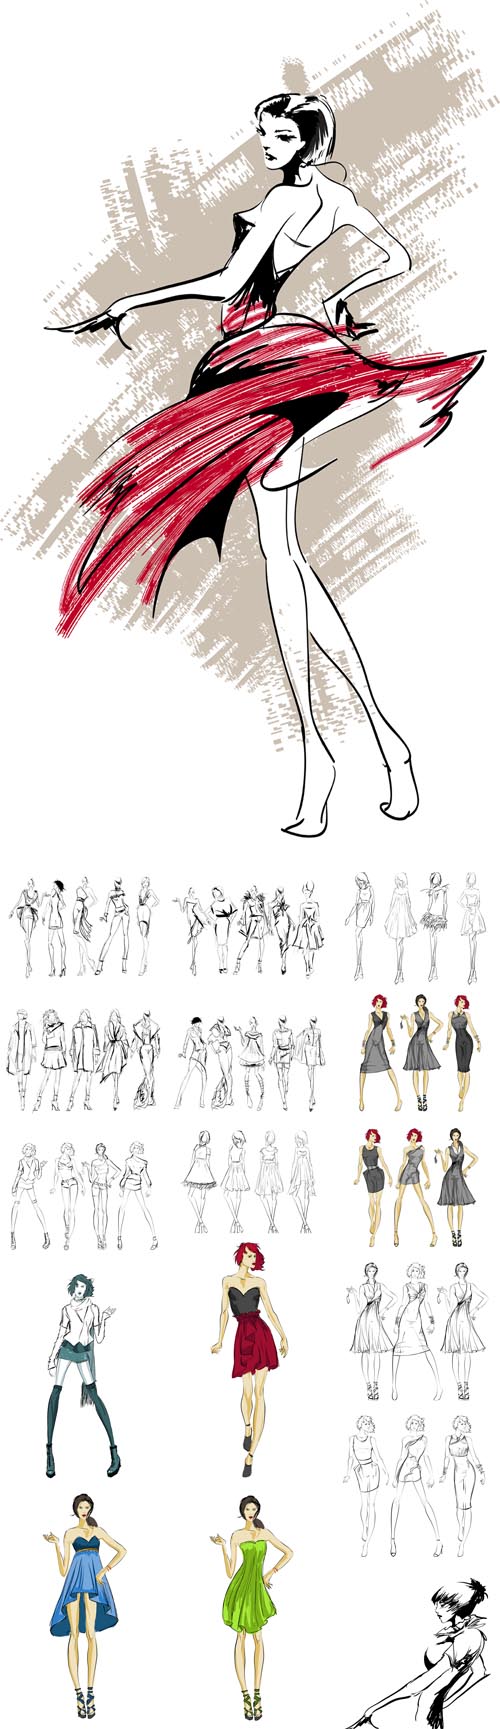 Vector Sketchs -Fashion Girls on a White Background